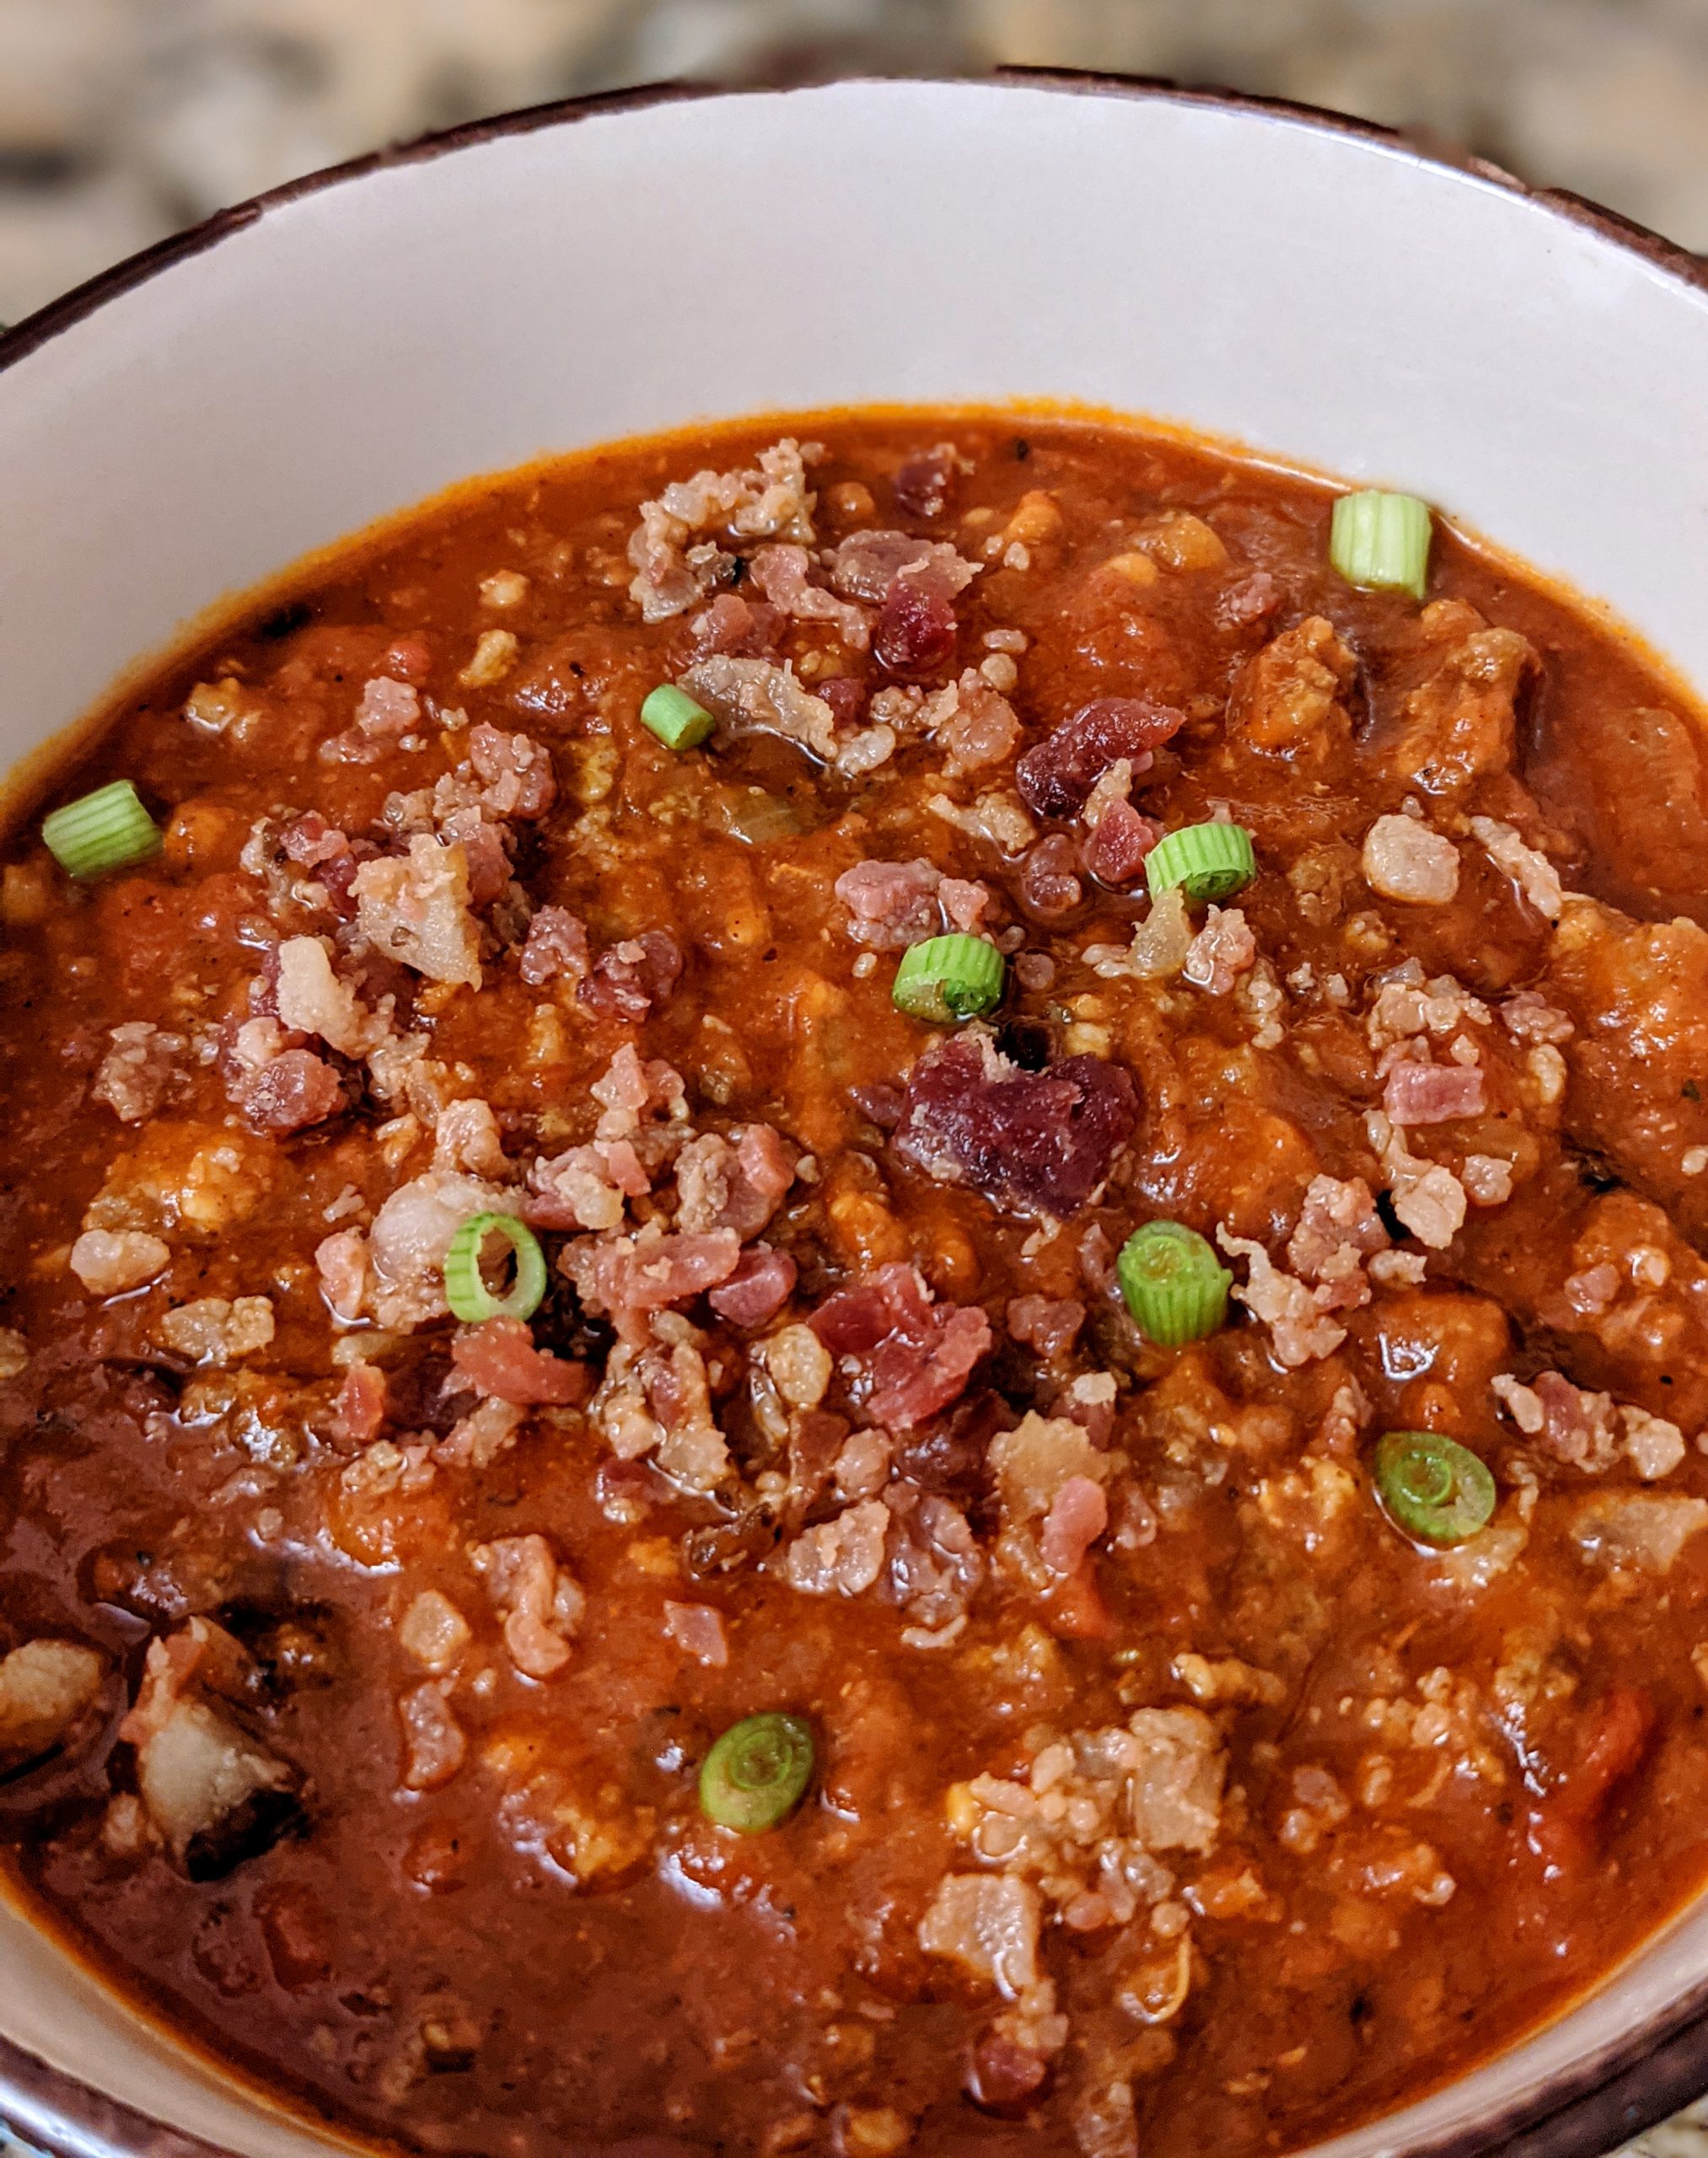 Slow-Cooker 3 Meat Chili - No beans - Café Flavorful